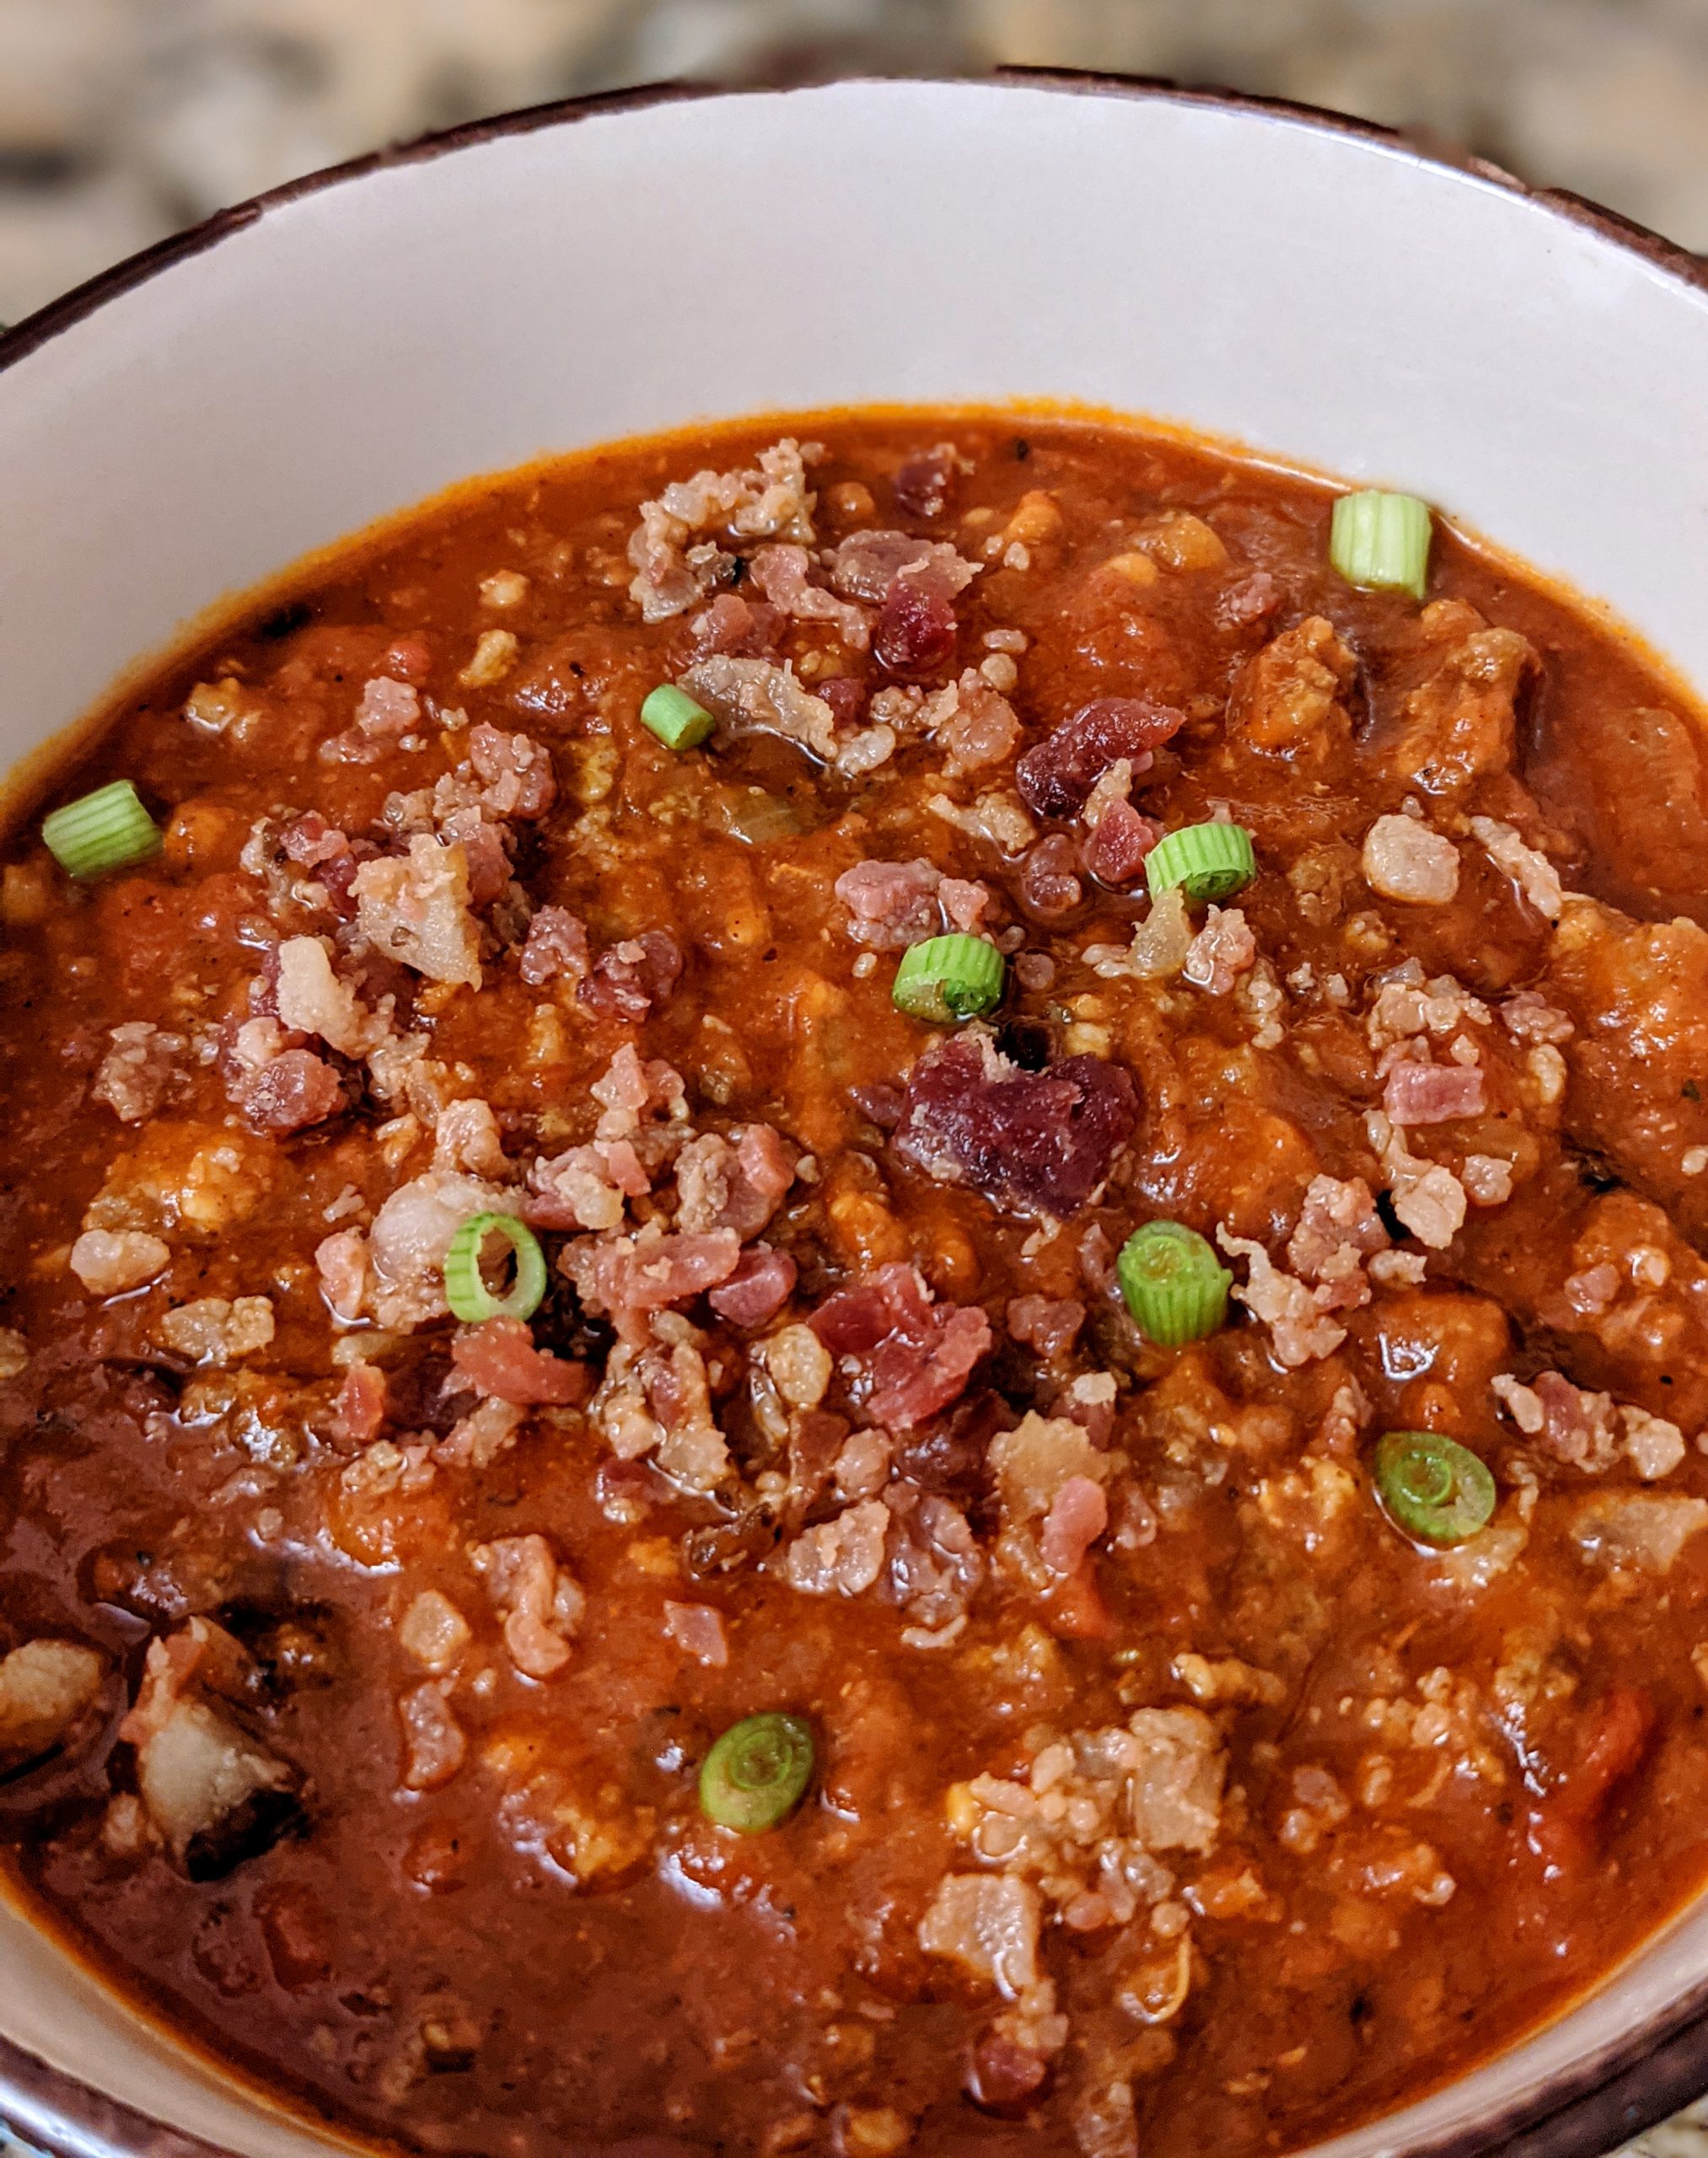 Slow-Cooker 3 Meat Chili - No beans - Café Flavorful